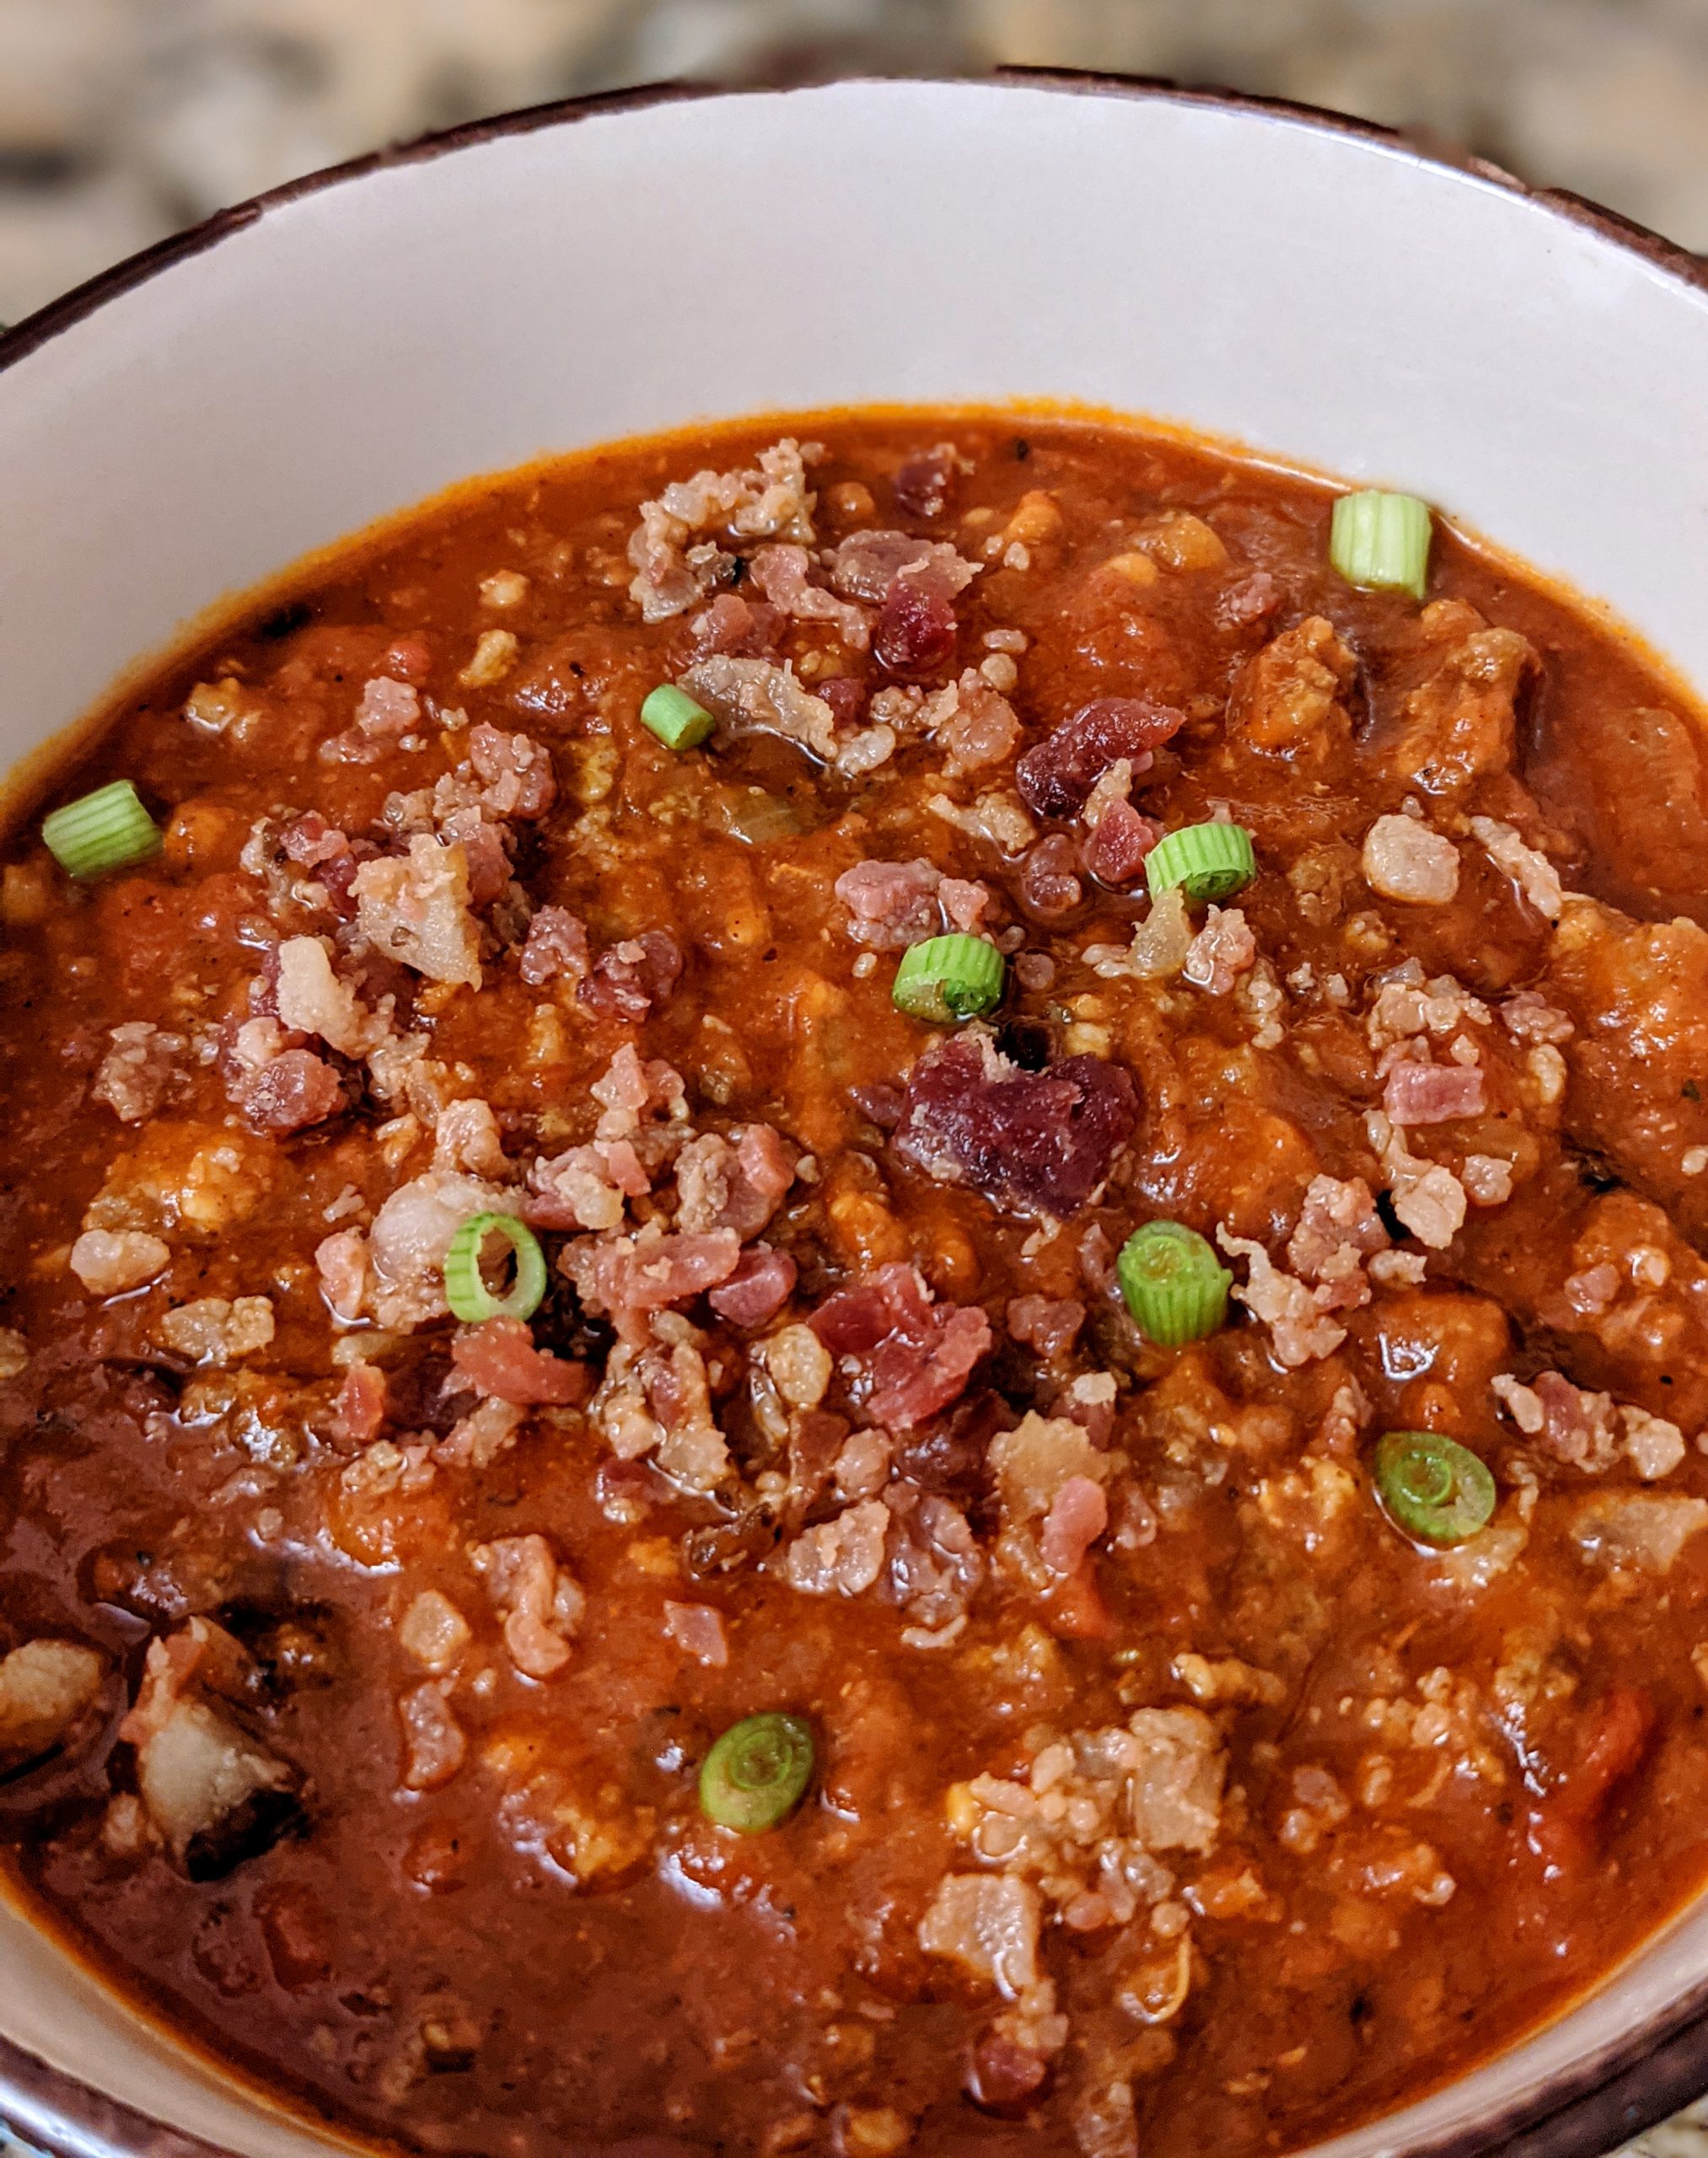 Slow-Cooker 3 Meat Chili - No beans - Café Flavorful